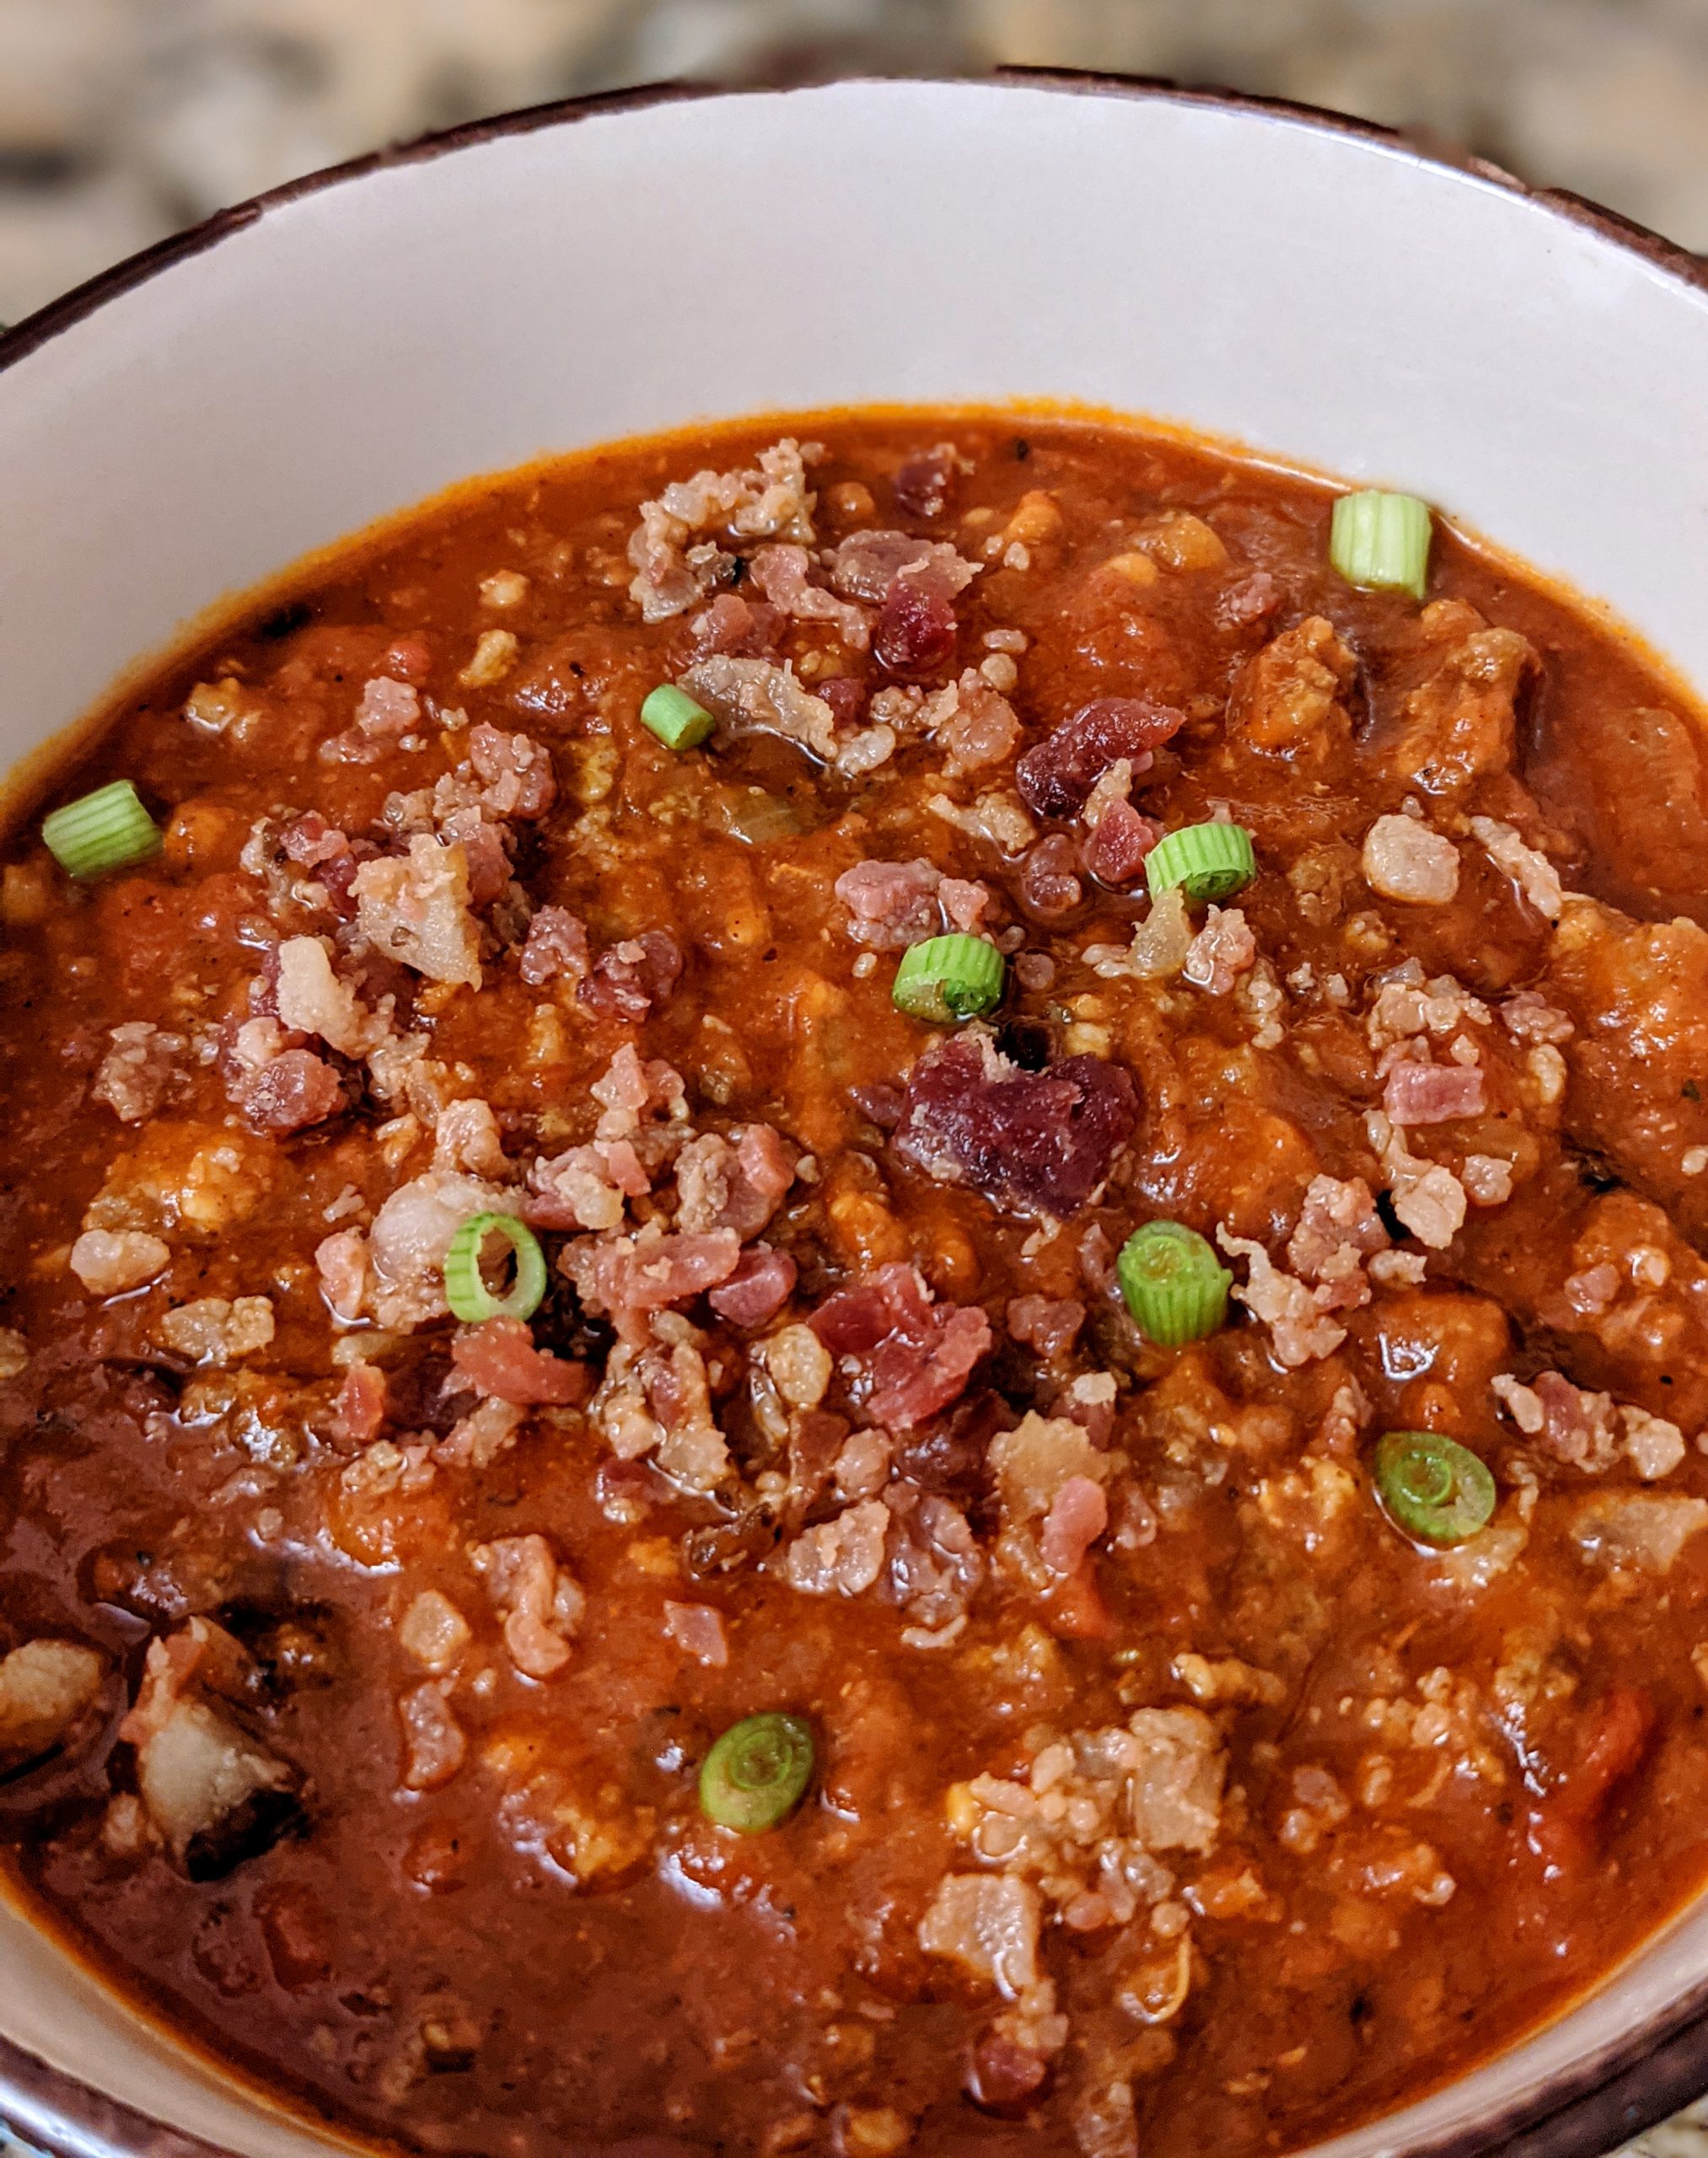 Slow-Cooker 3 Meat Chili - No beans - Café Flavorful